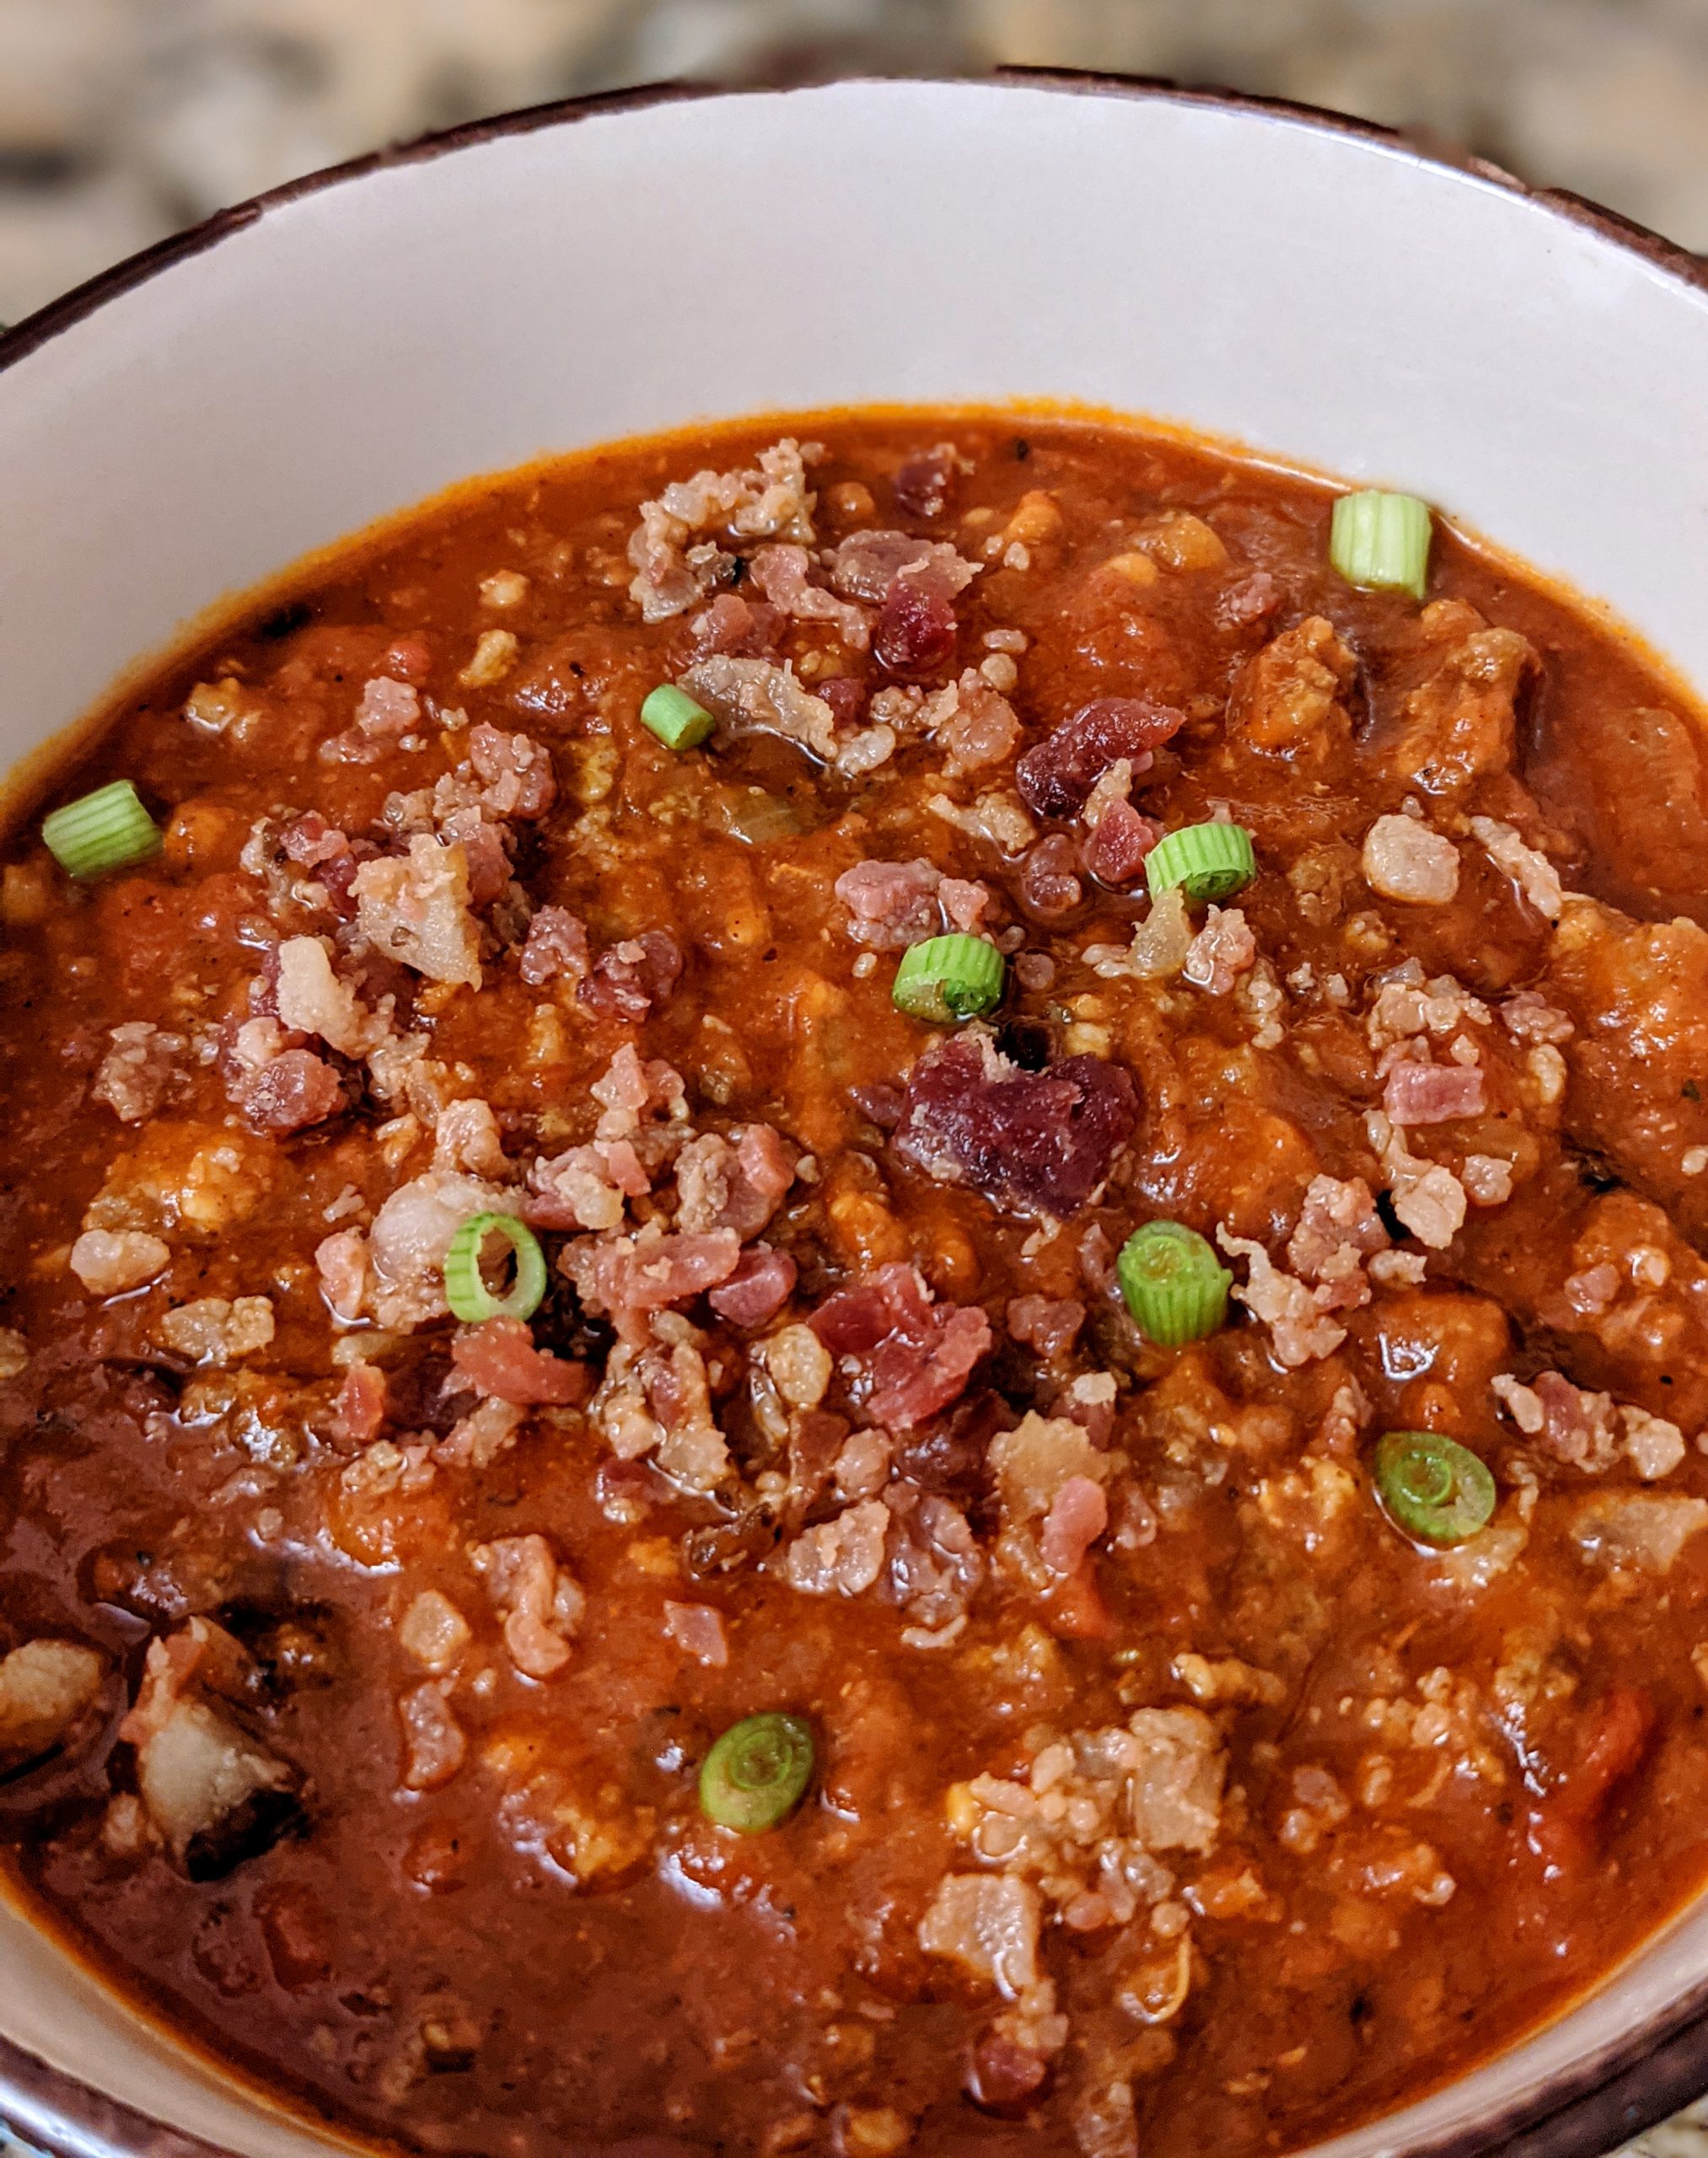 Slow-Cooker 3 Meat Chili - No beans - Café Flavorful